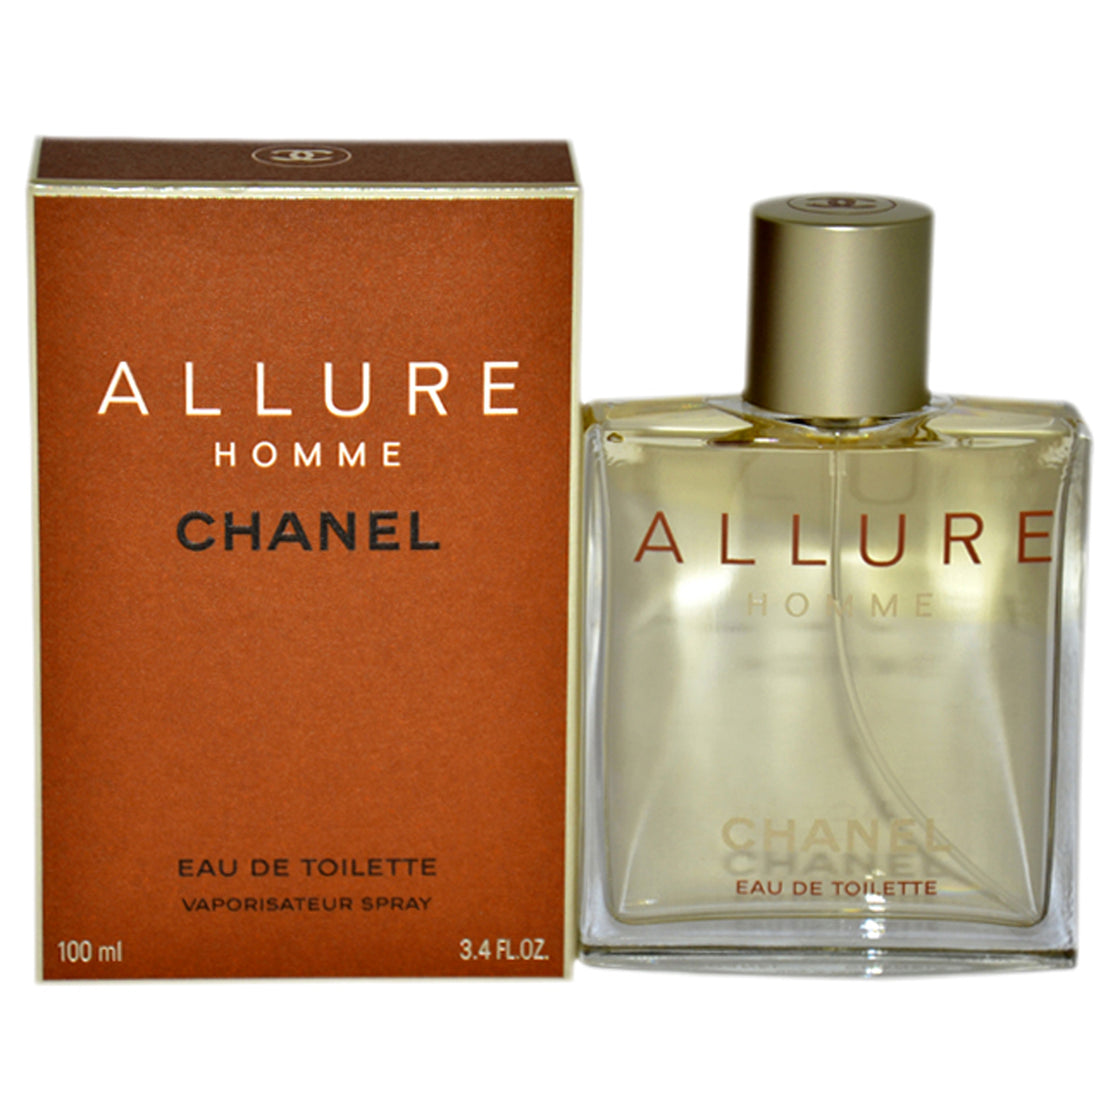 Allure by Chanel for Men - 3.4 oz EDT Spray